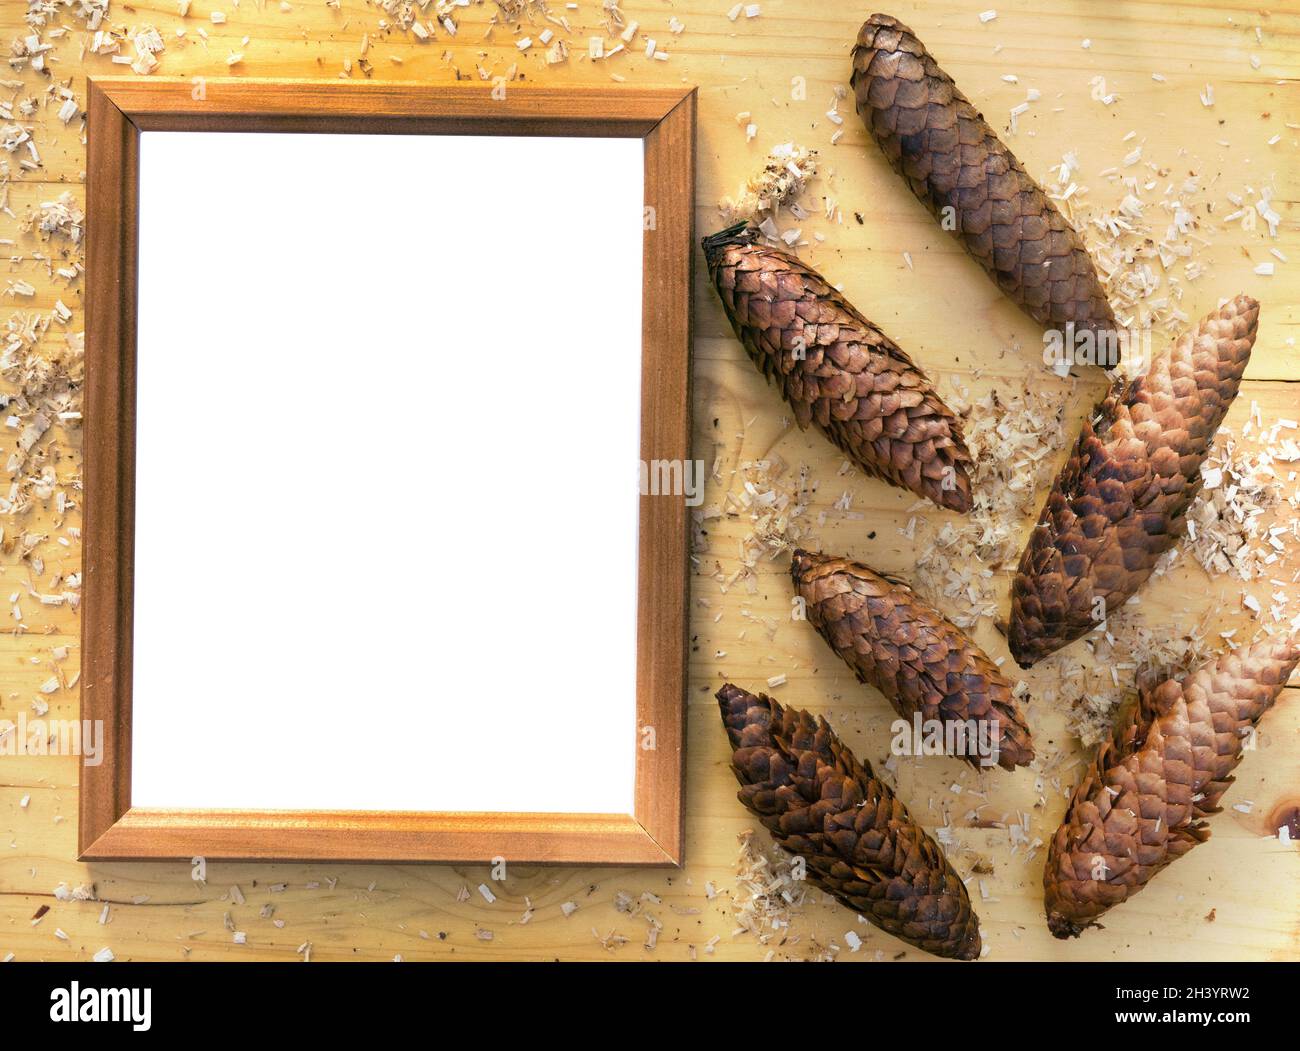 Floral still life with signature frame Stock Photo